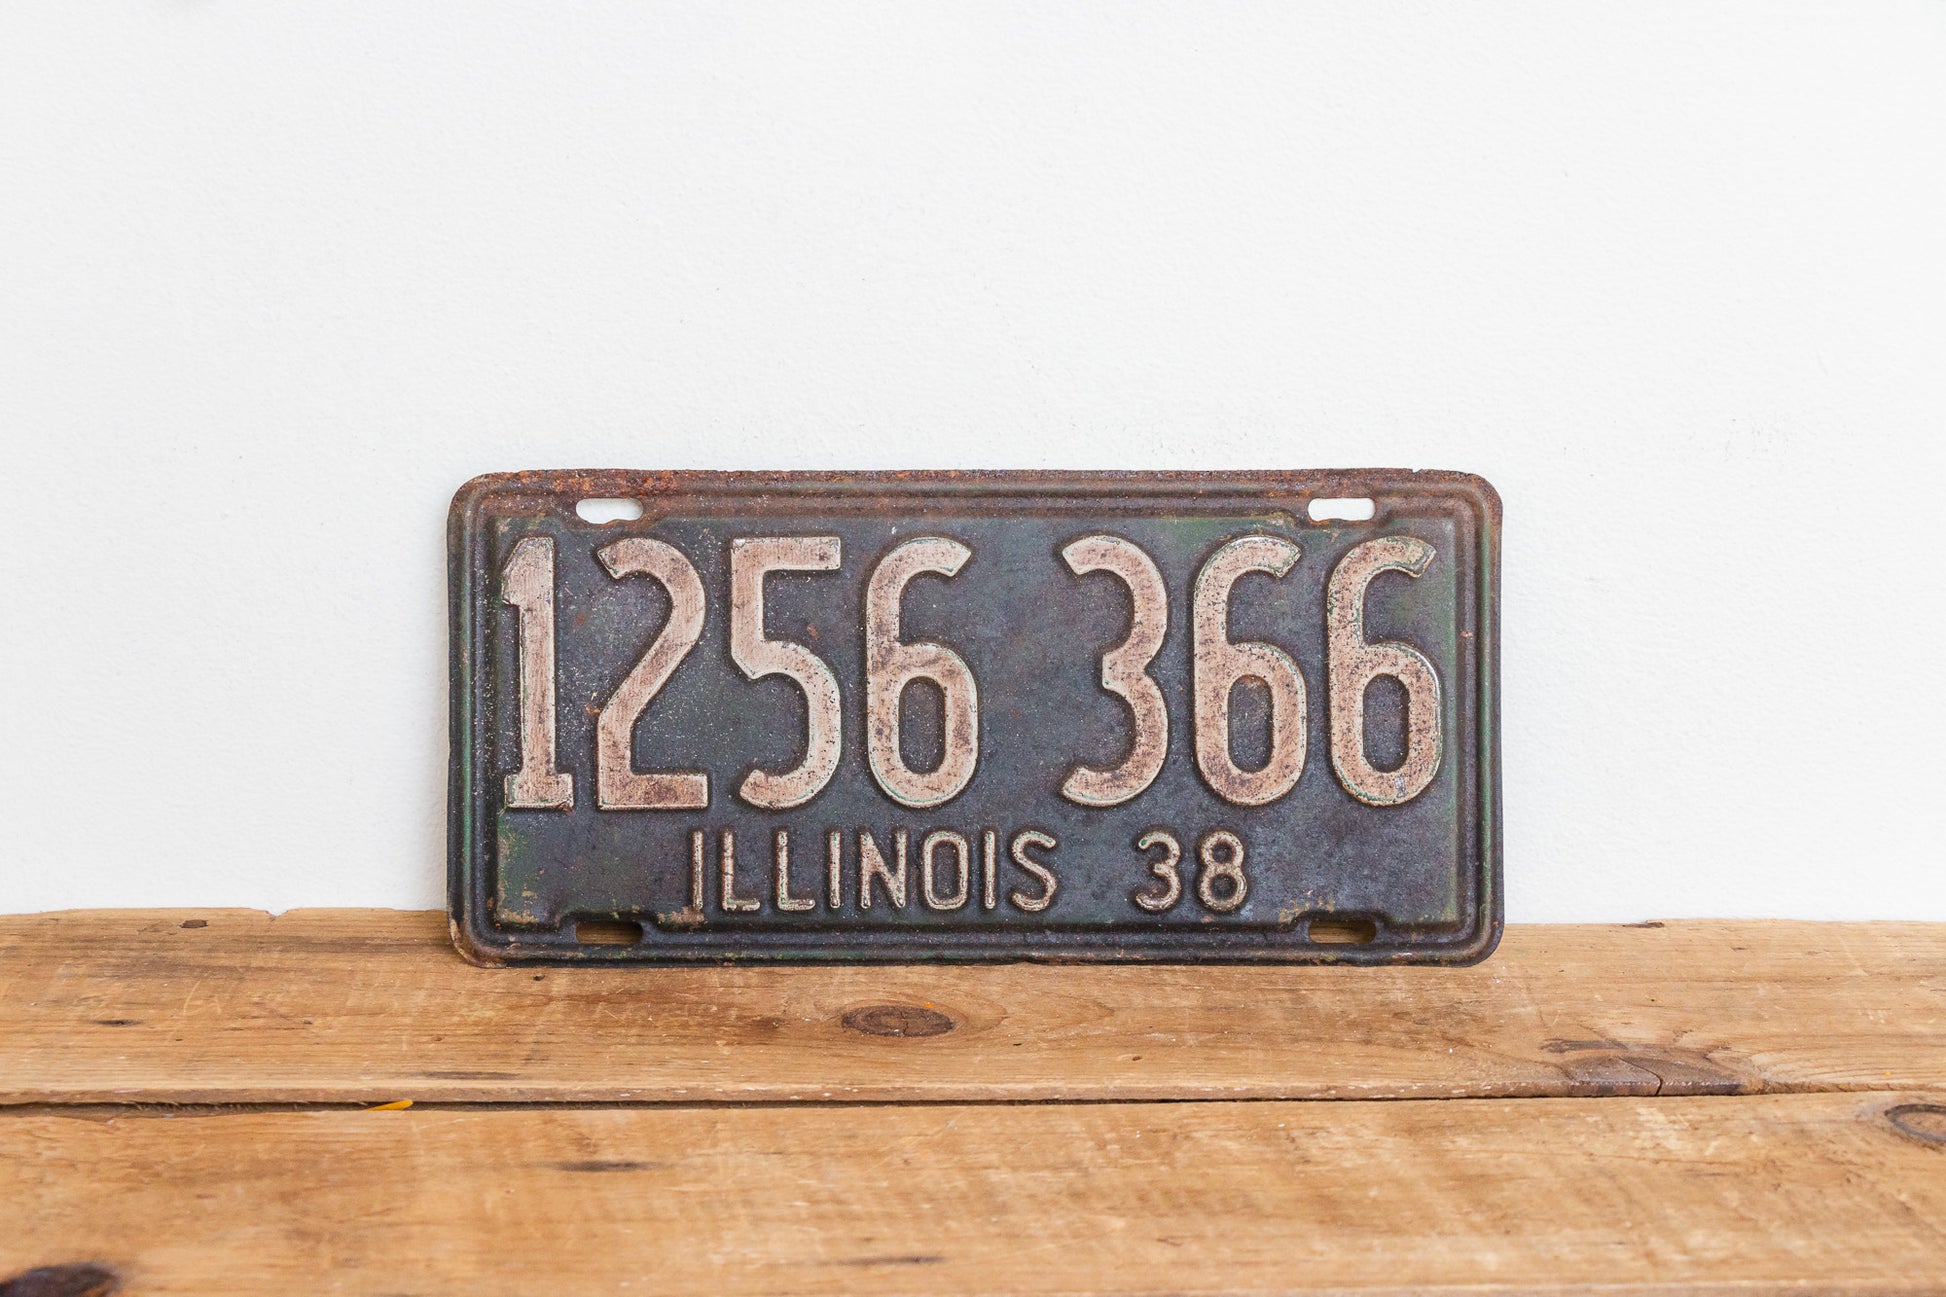 Illinois 1938 License Plate Vintage Black Wall Hanging Decor 1256-366 - Eagle's Eye Finds